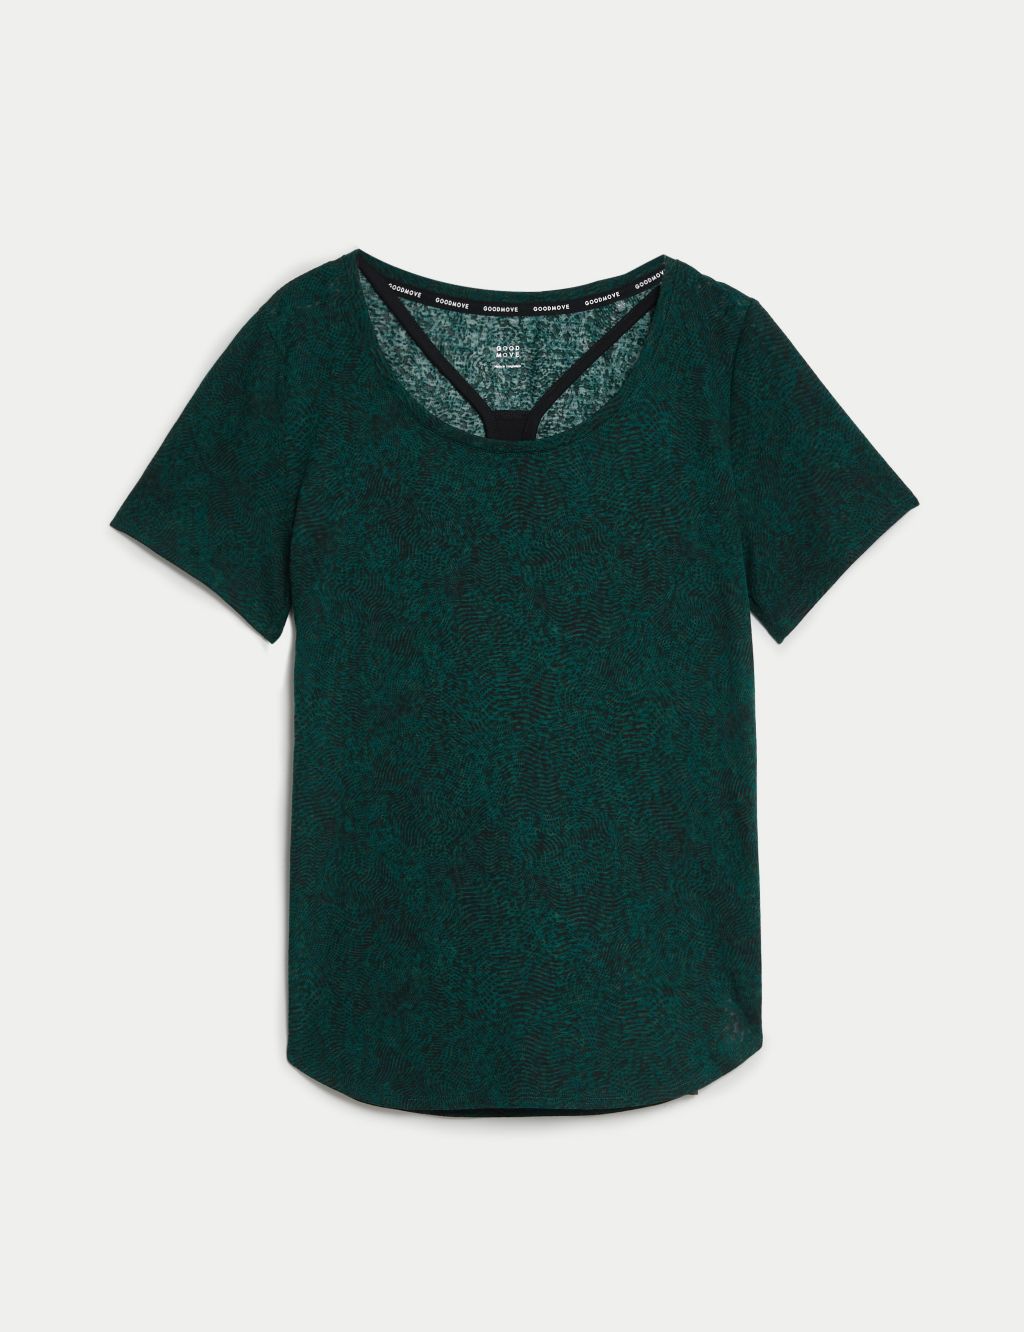 Printed Scoop Neck 2-in-1 T-Shirt image 2